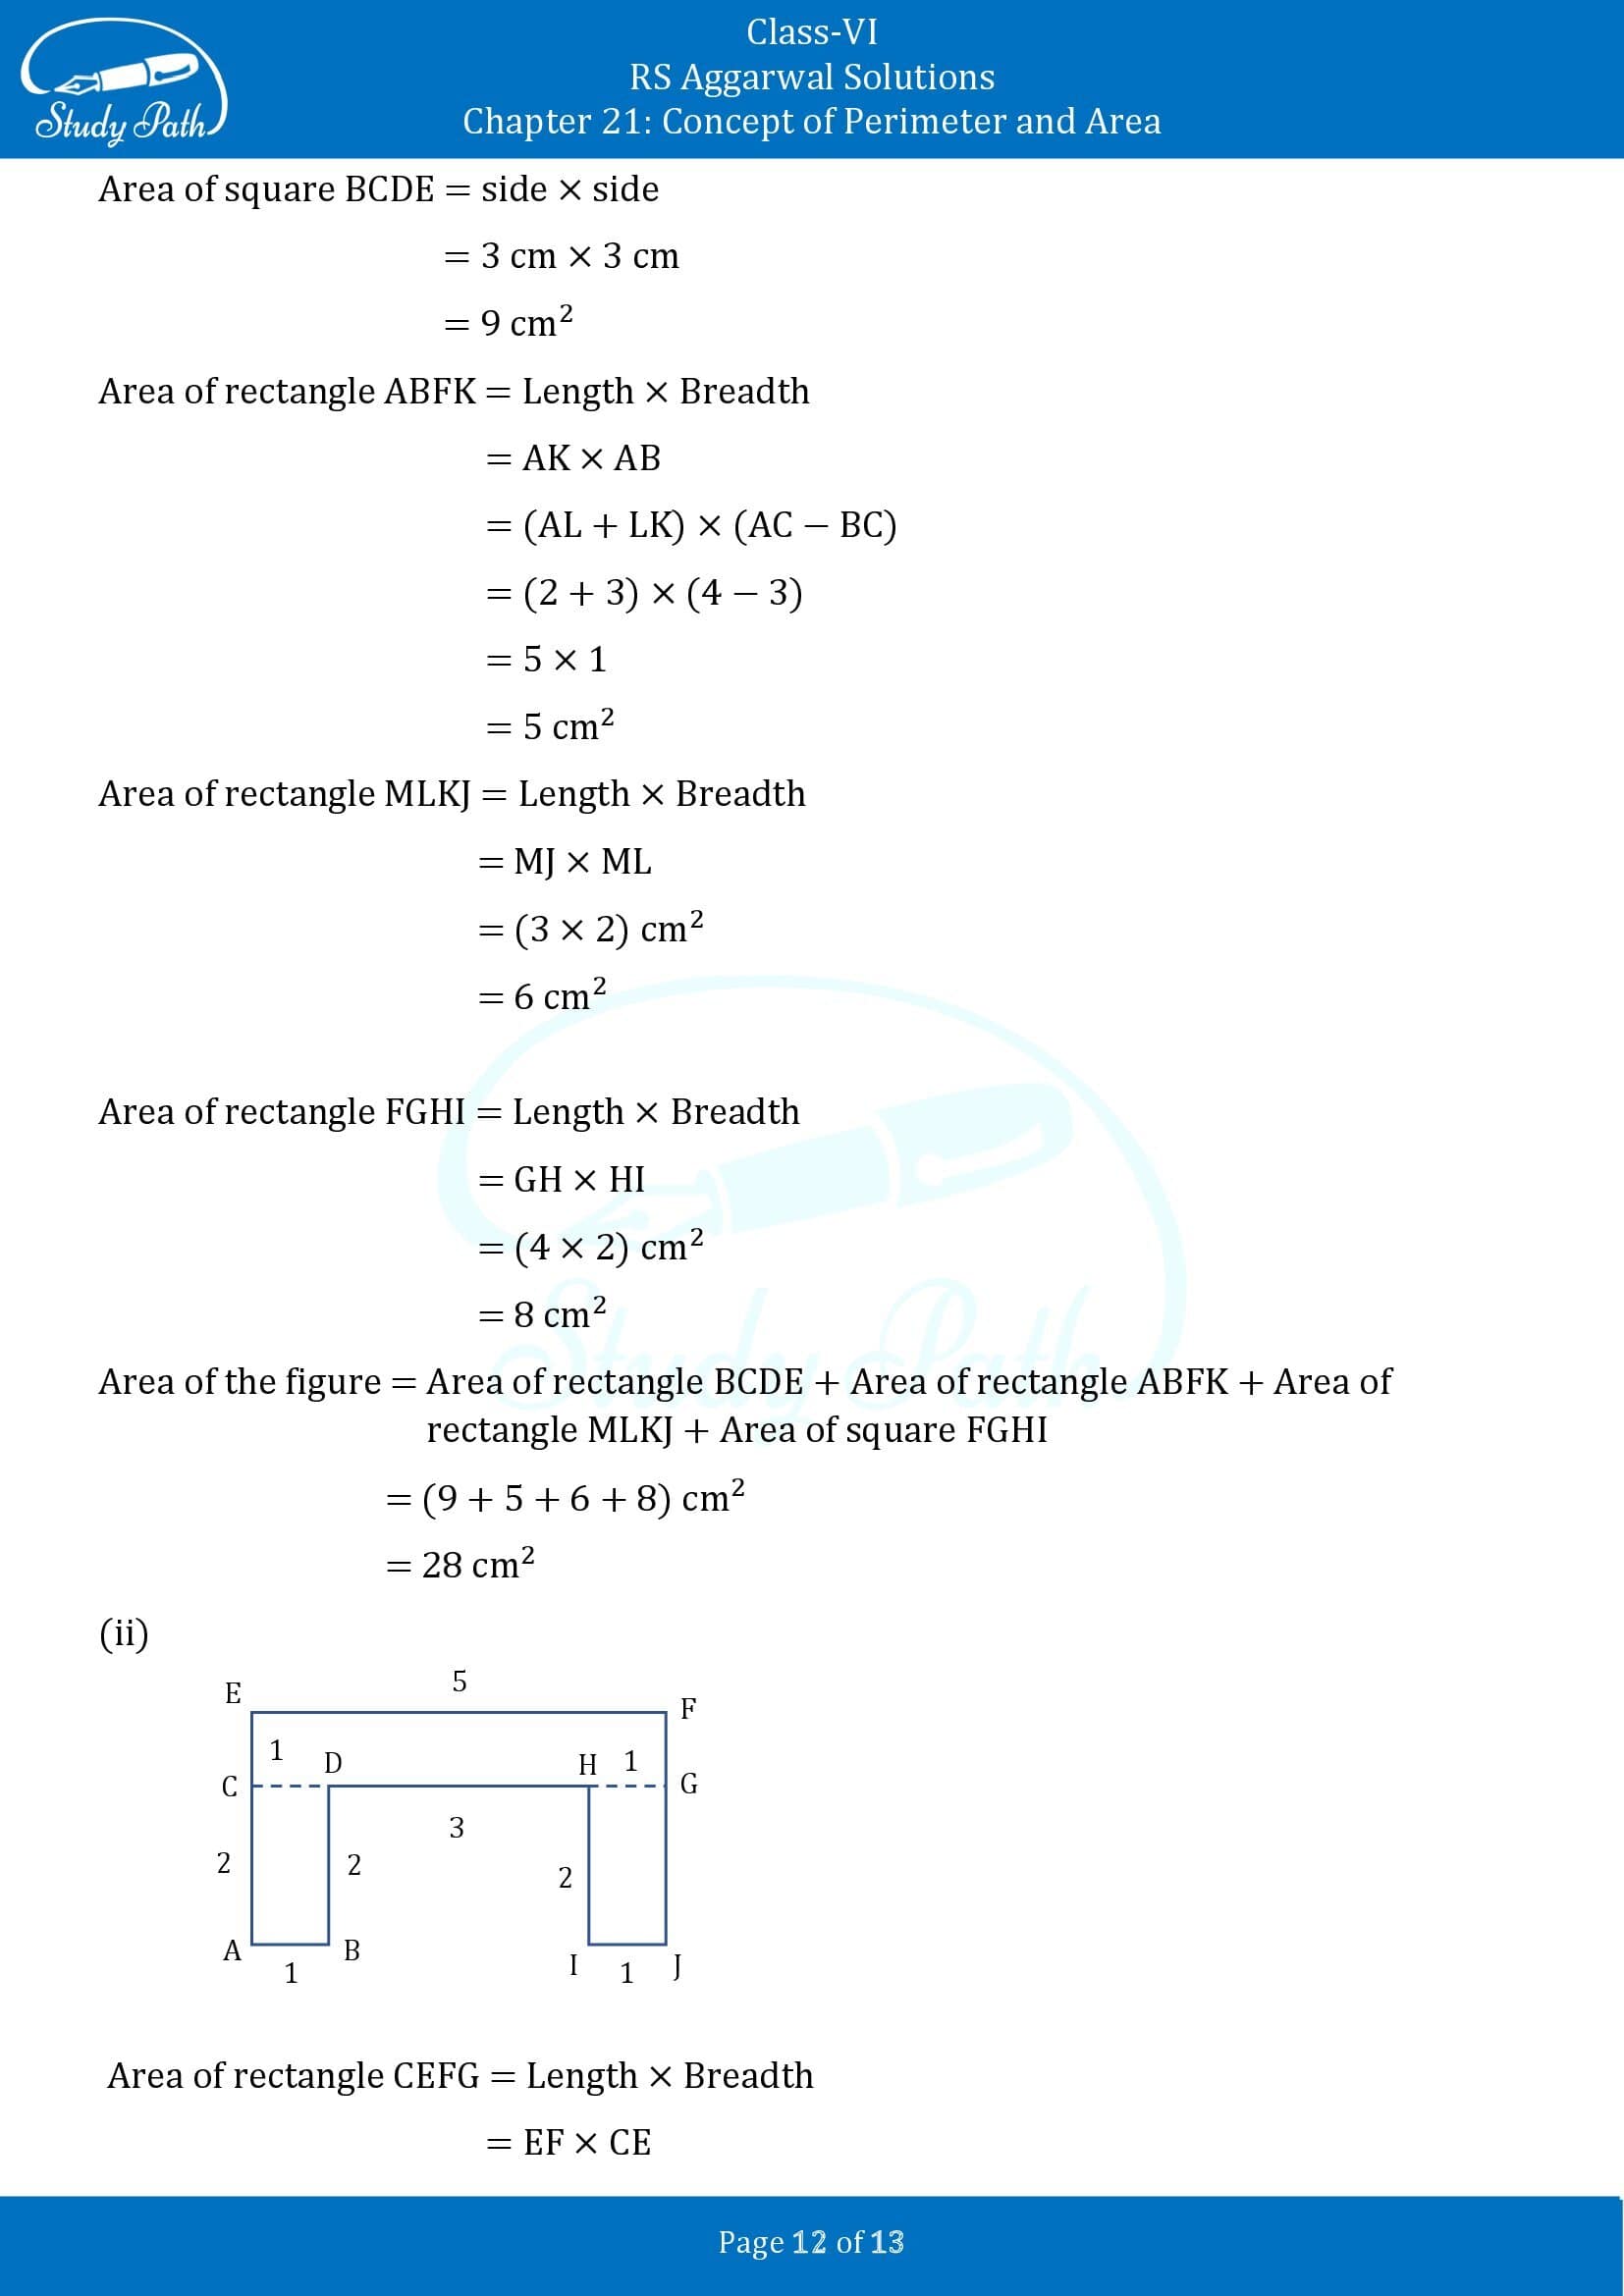 RS Aggarwal Solutions Class 6 Chapter 21 Concept of Perimeter and Area Exercise 21D 00012